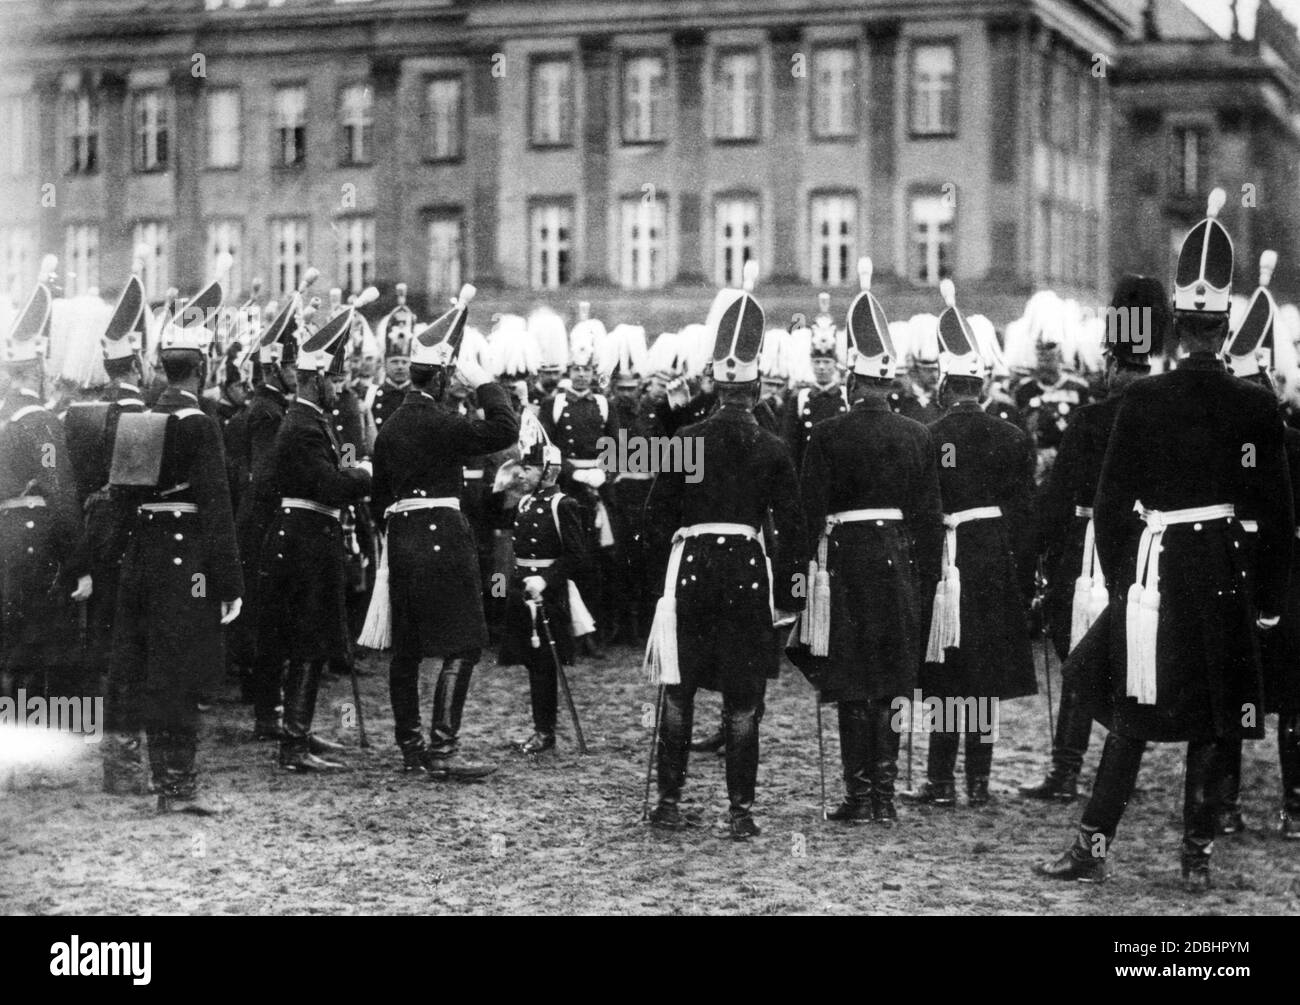 The ten-year-old eldest son of Emperor Wilhelm II joins the 1st Foot Guard Regiment in Potsdam as a lieutenant at the age of 10. He greets the officers of the regiment, who have put on their traditional uniform. Stock Photo